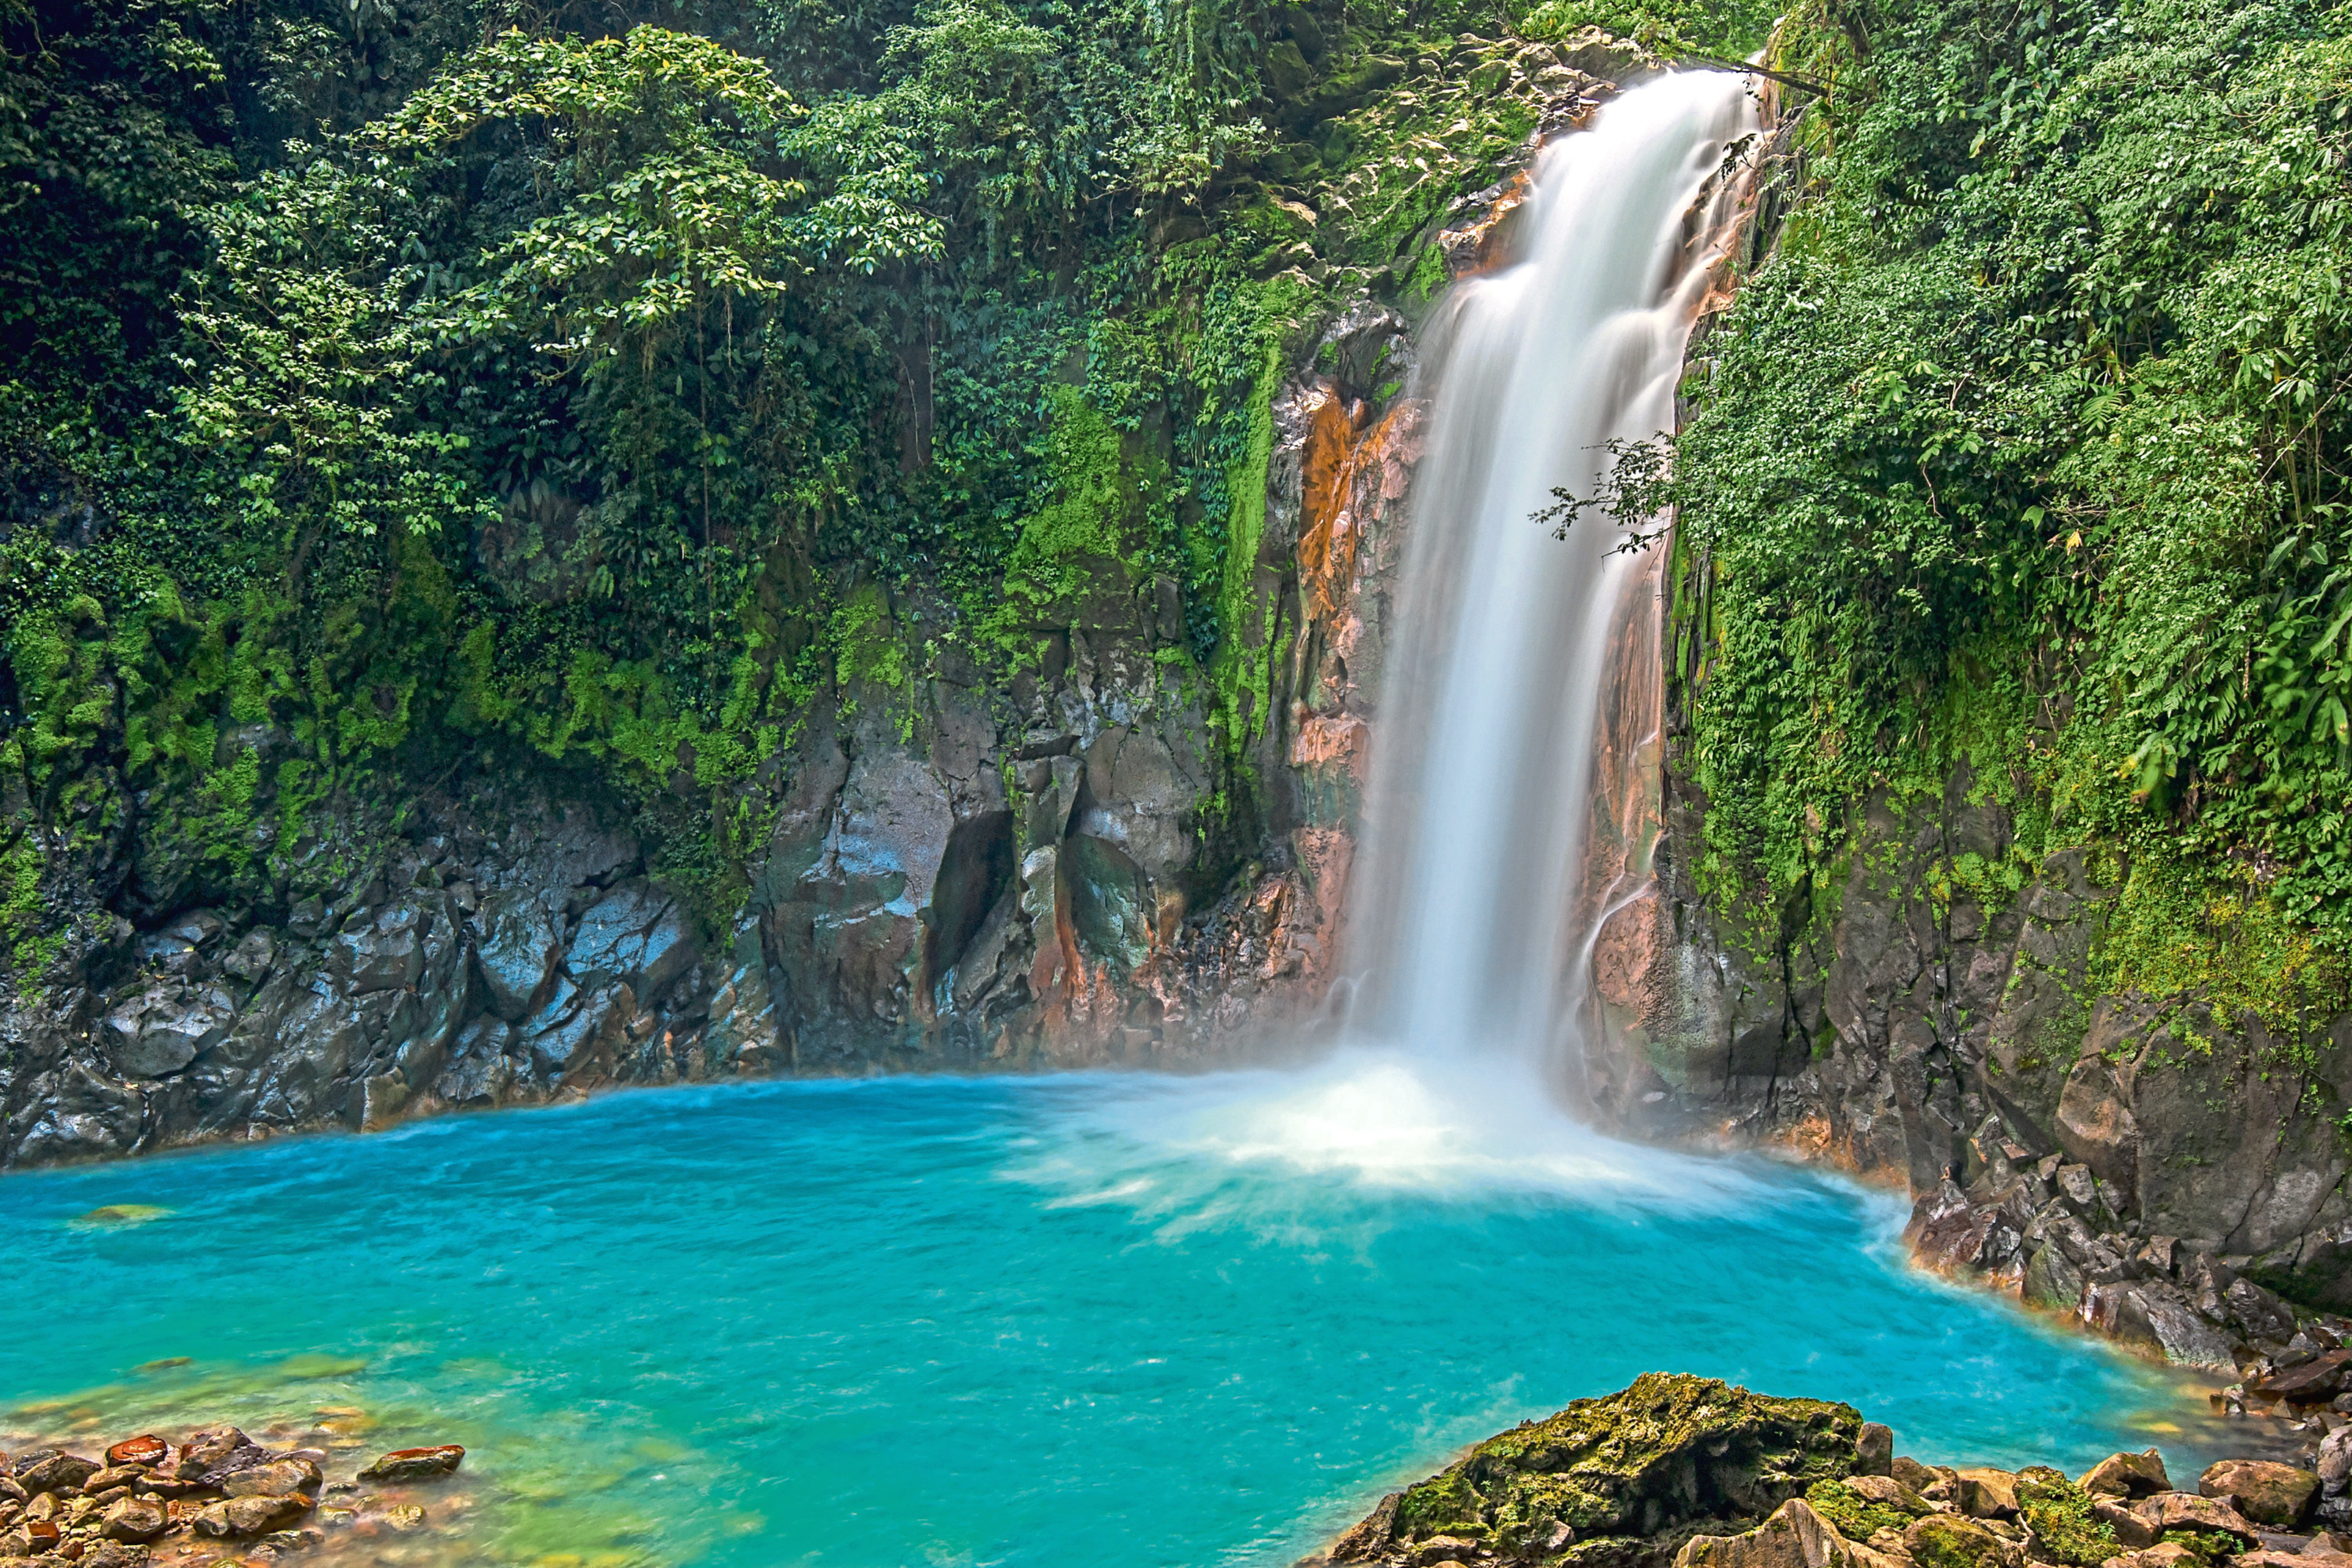 Rio Celeste Waterfall in Costa Rica, a country of immense beauty – and spiders!